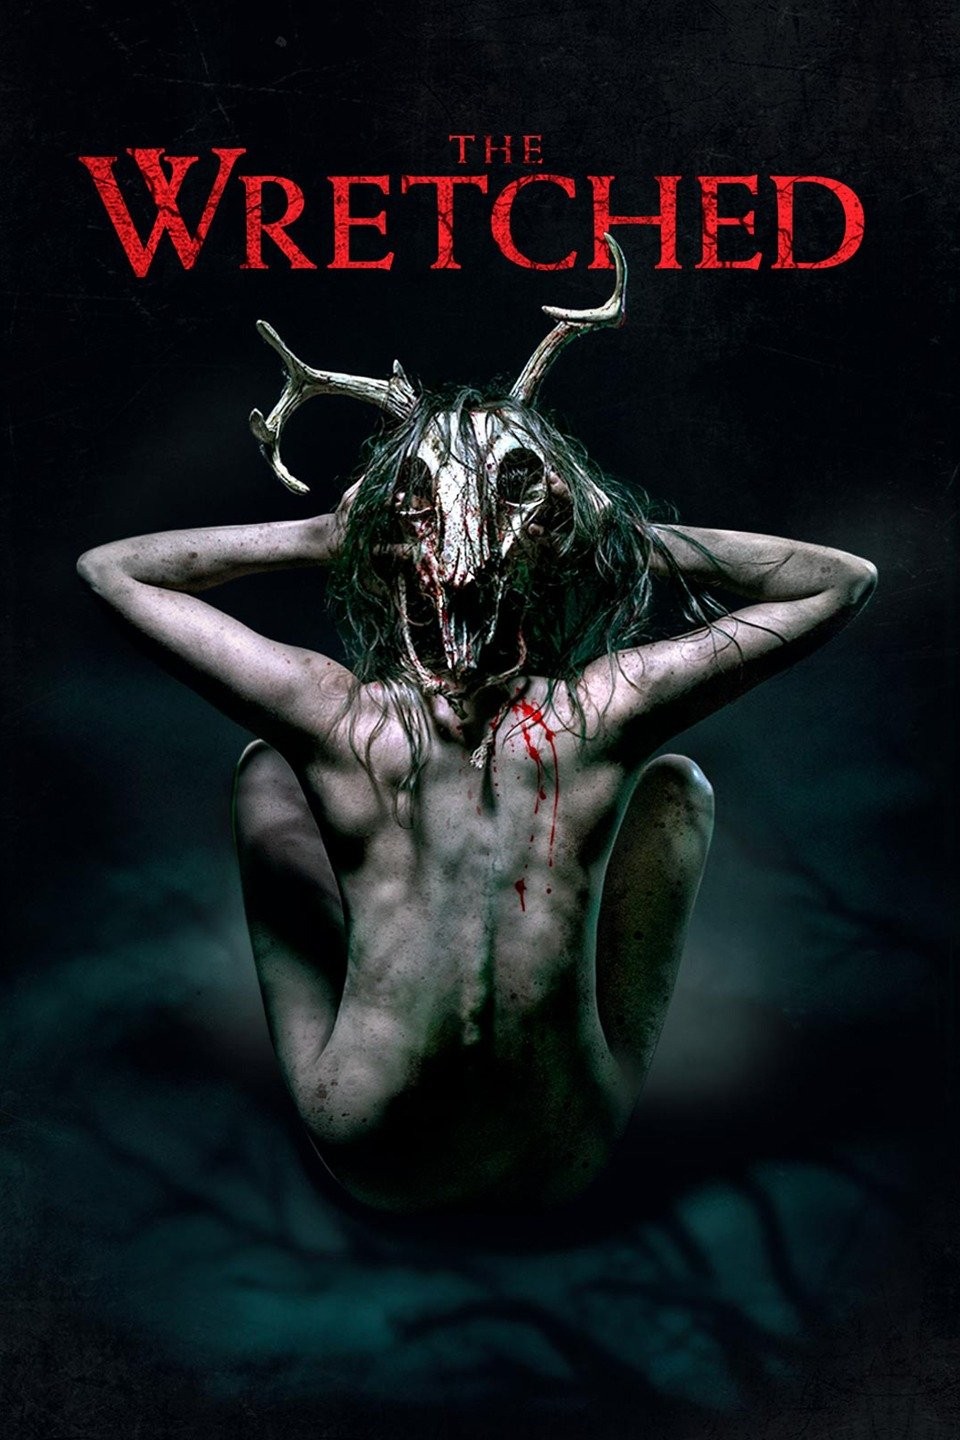 THE WRETCHED Official Trailer (2019) Horror Movie HD - YouTube